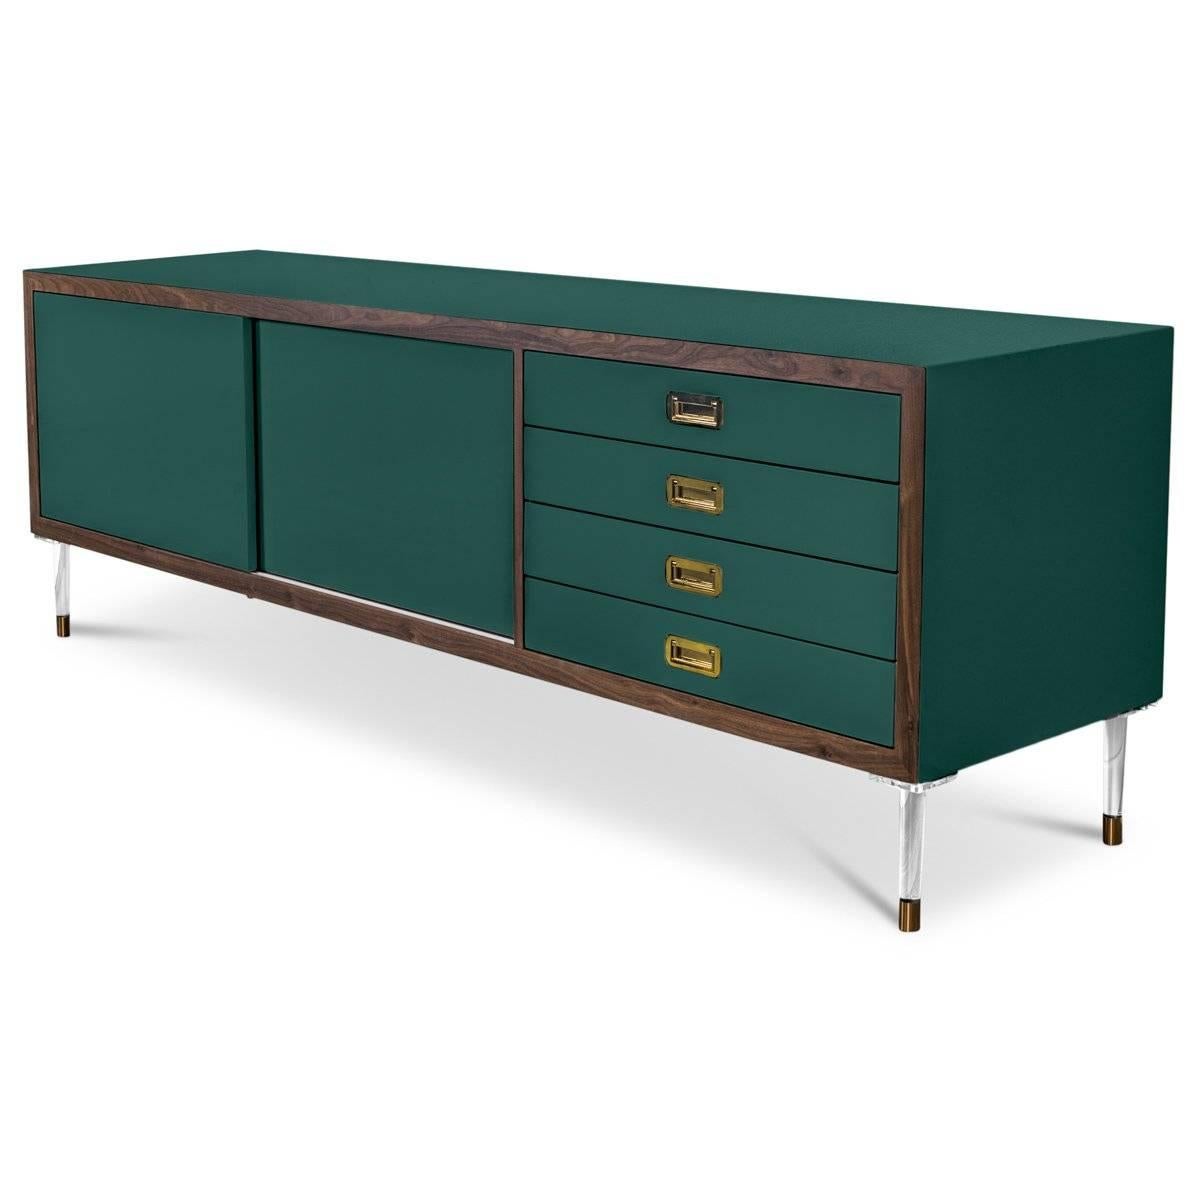 Introducing our new St. Martin Credenza featuring two sliding doors and four drawers to maximize its functionality while still being stylish and chic. This retro-modern design features an oiled walnut trim, brass hardware, our famous Hunter Green